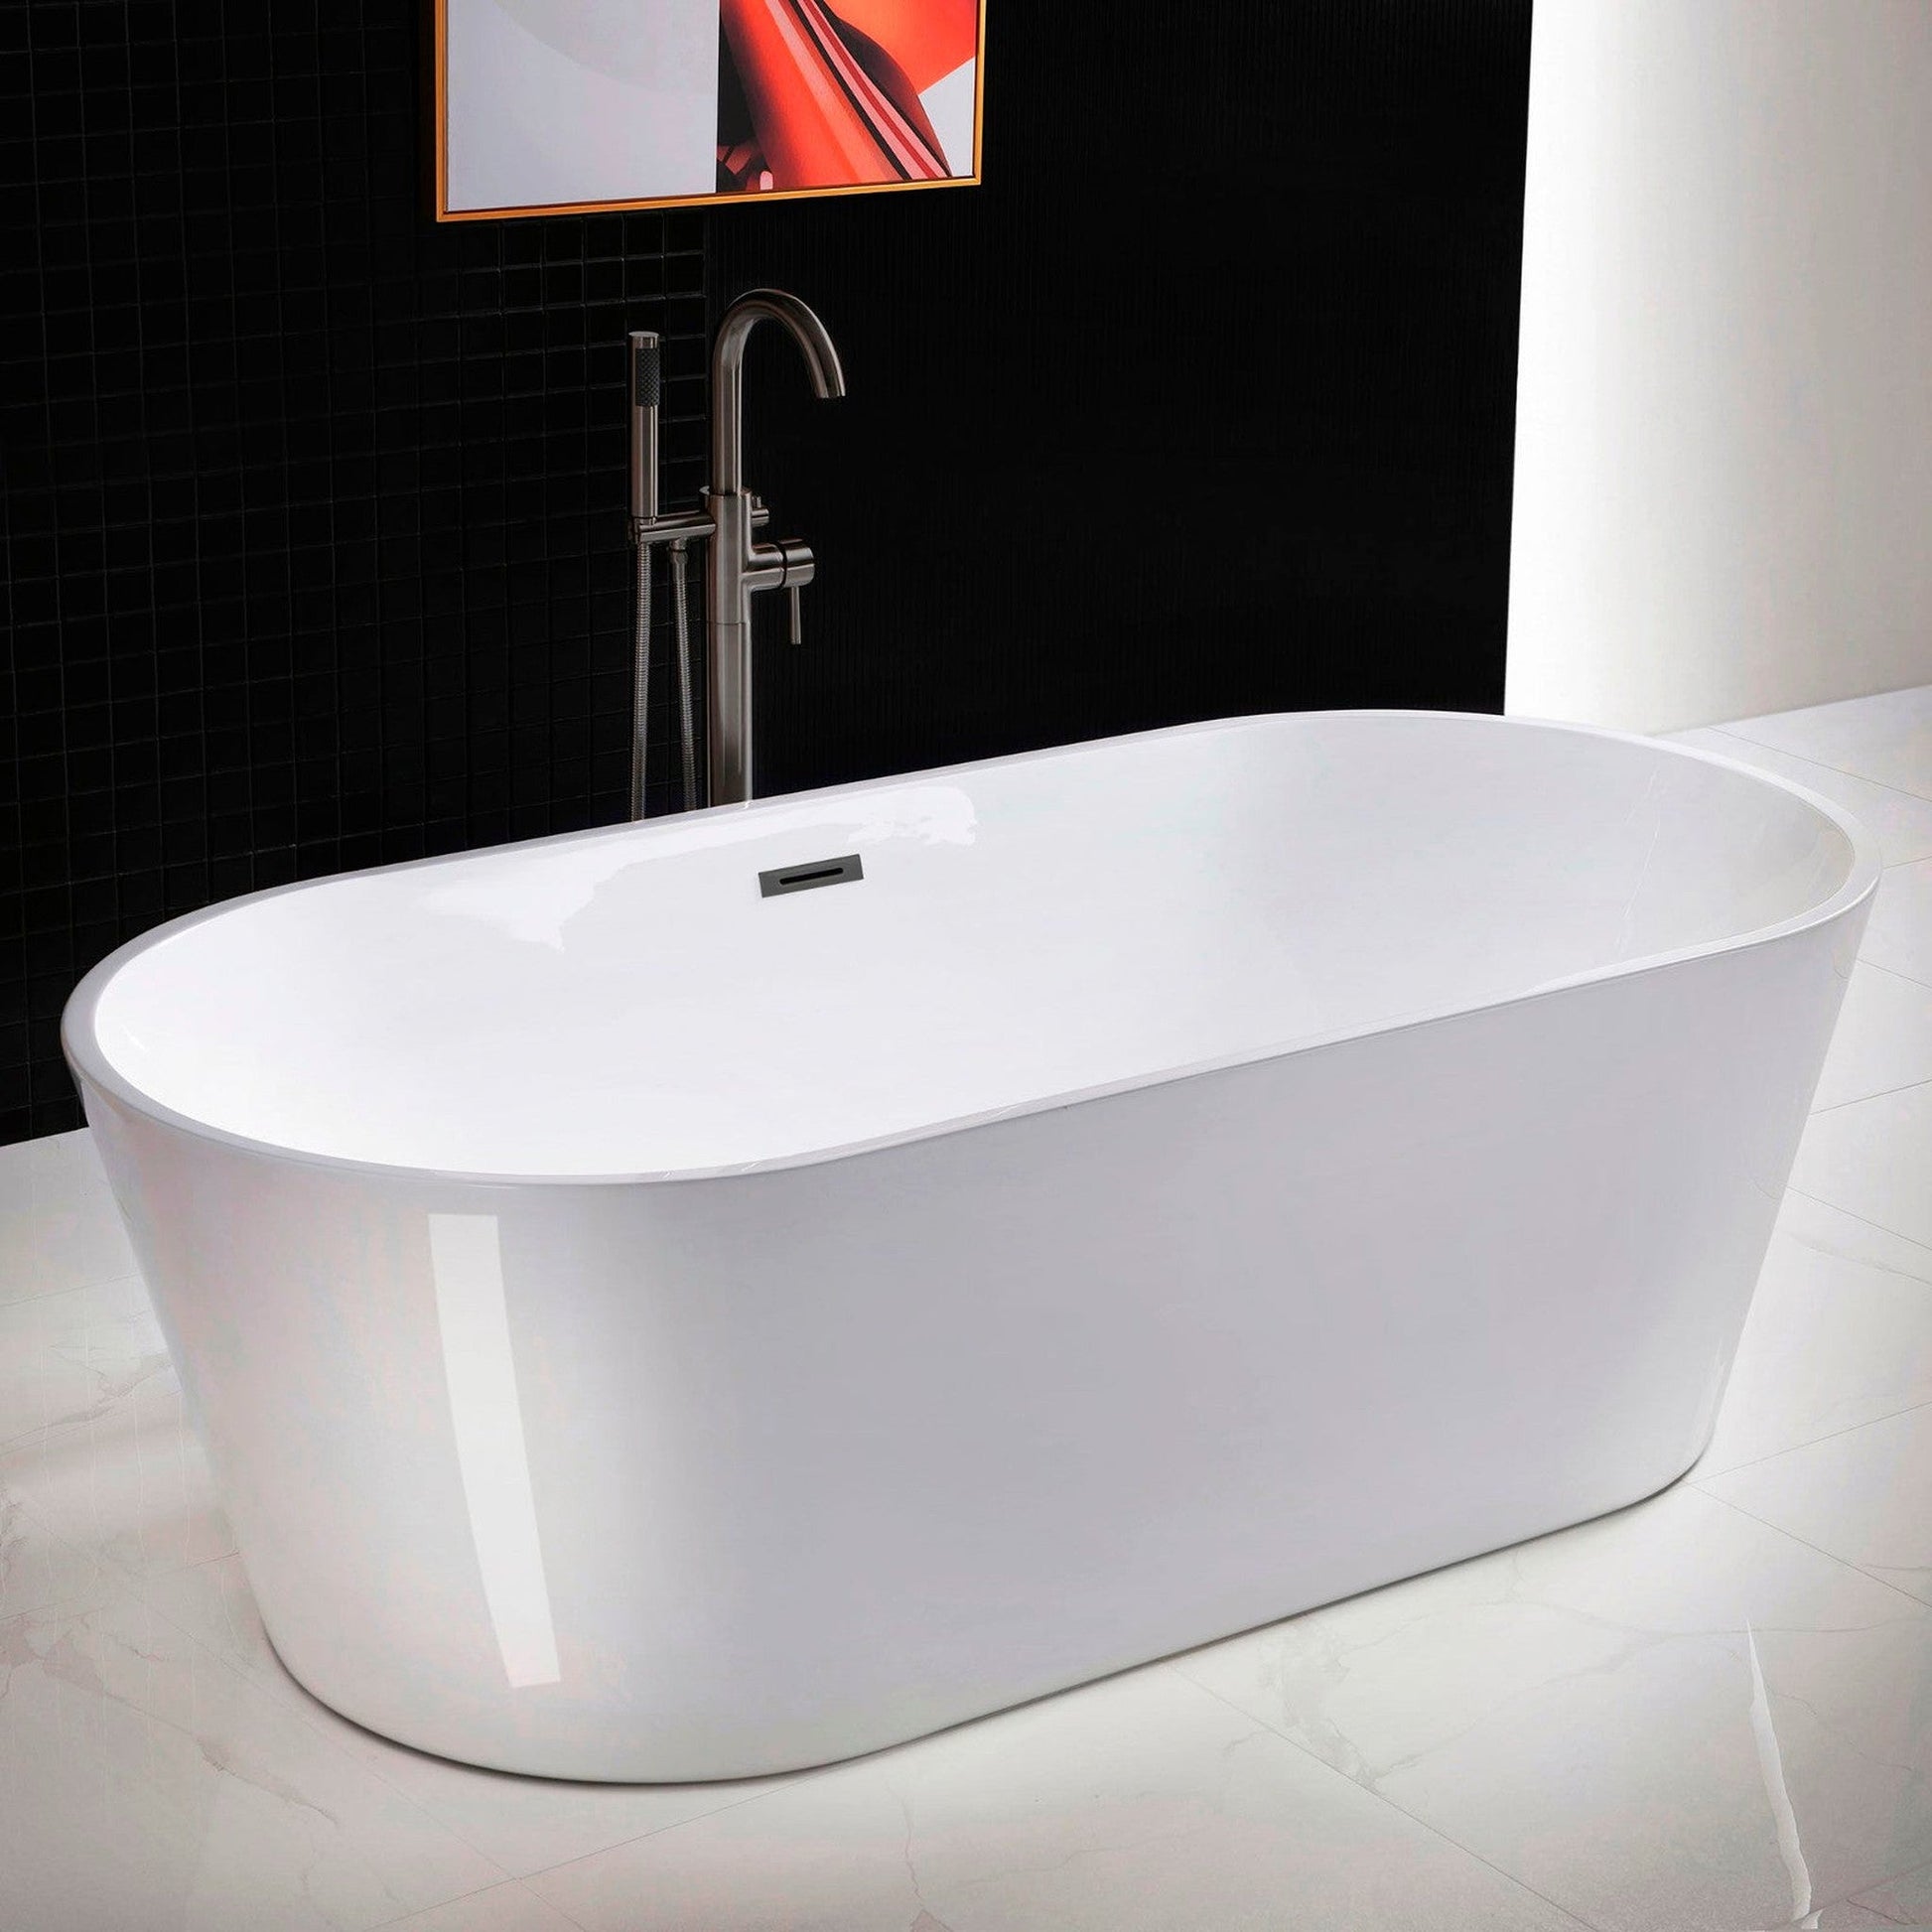 WoodBridge 71" White Acrylic Freestanding Contemporary Soaking Bathtub With Matte Black Drain, Overflow, F-0015 Tub Filler and Caddy Tray